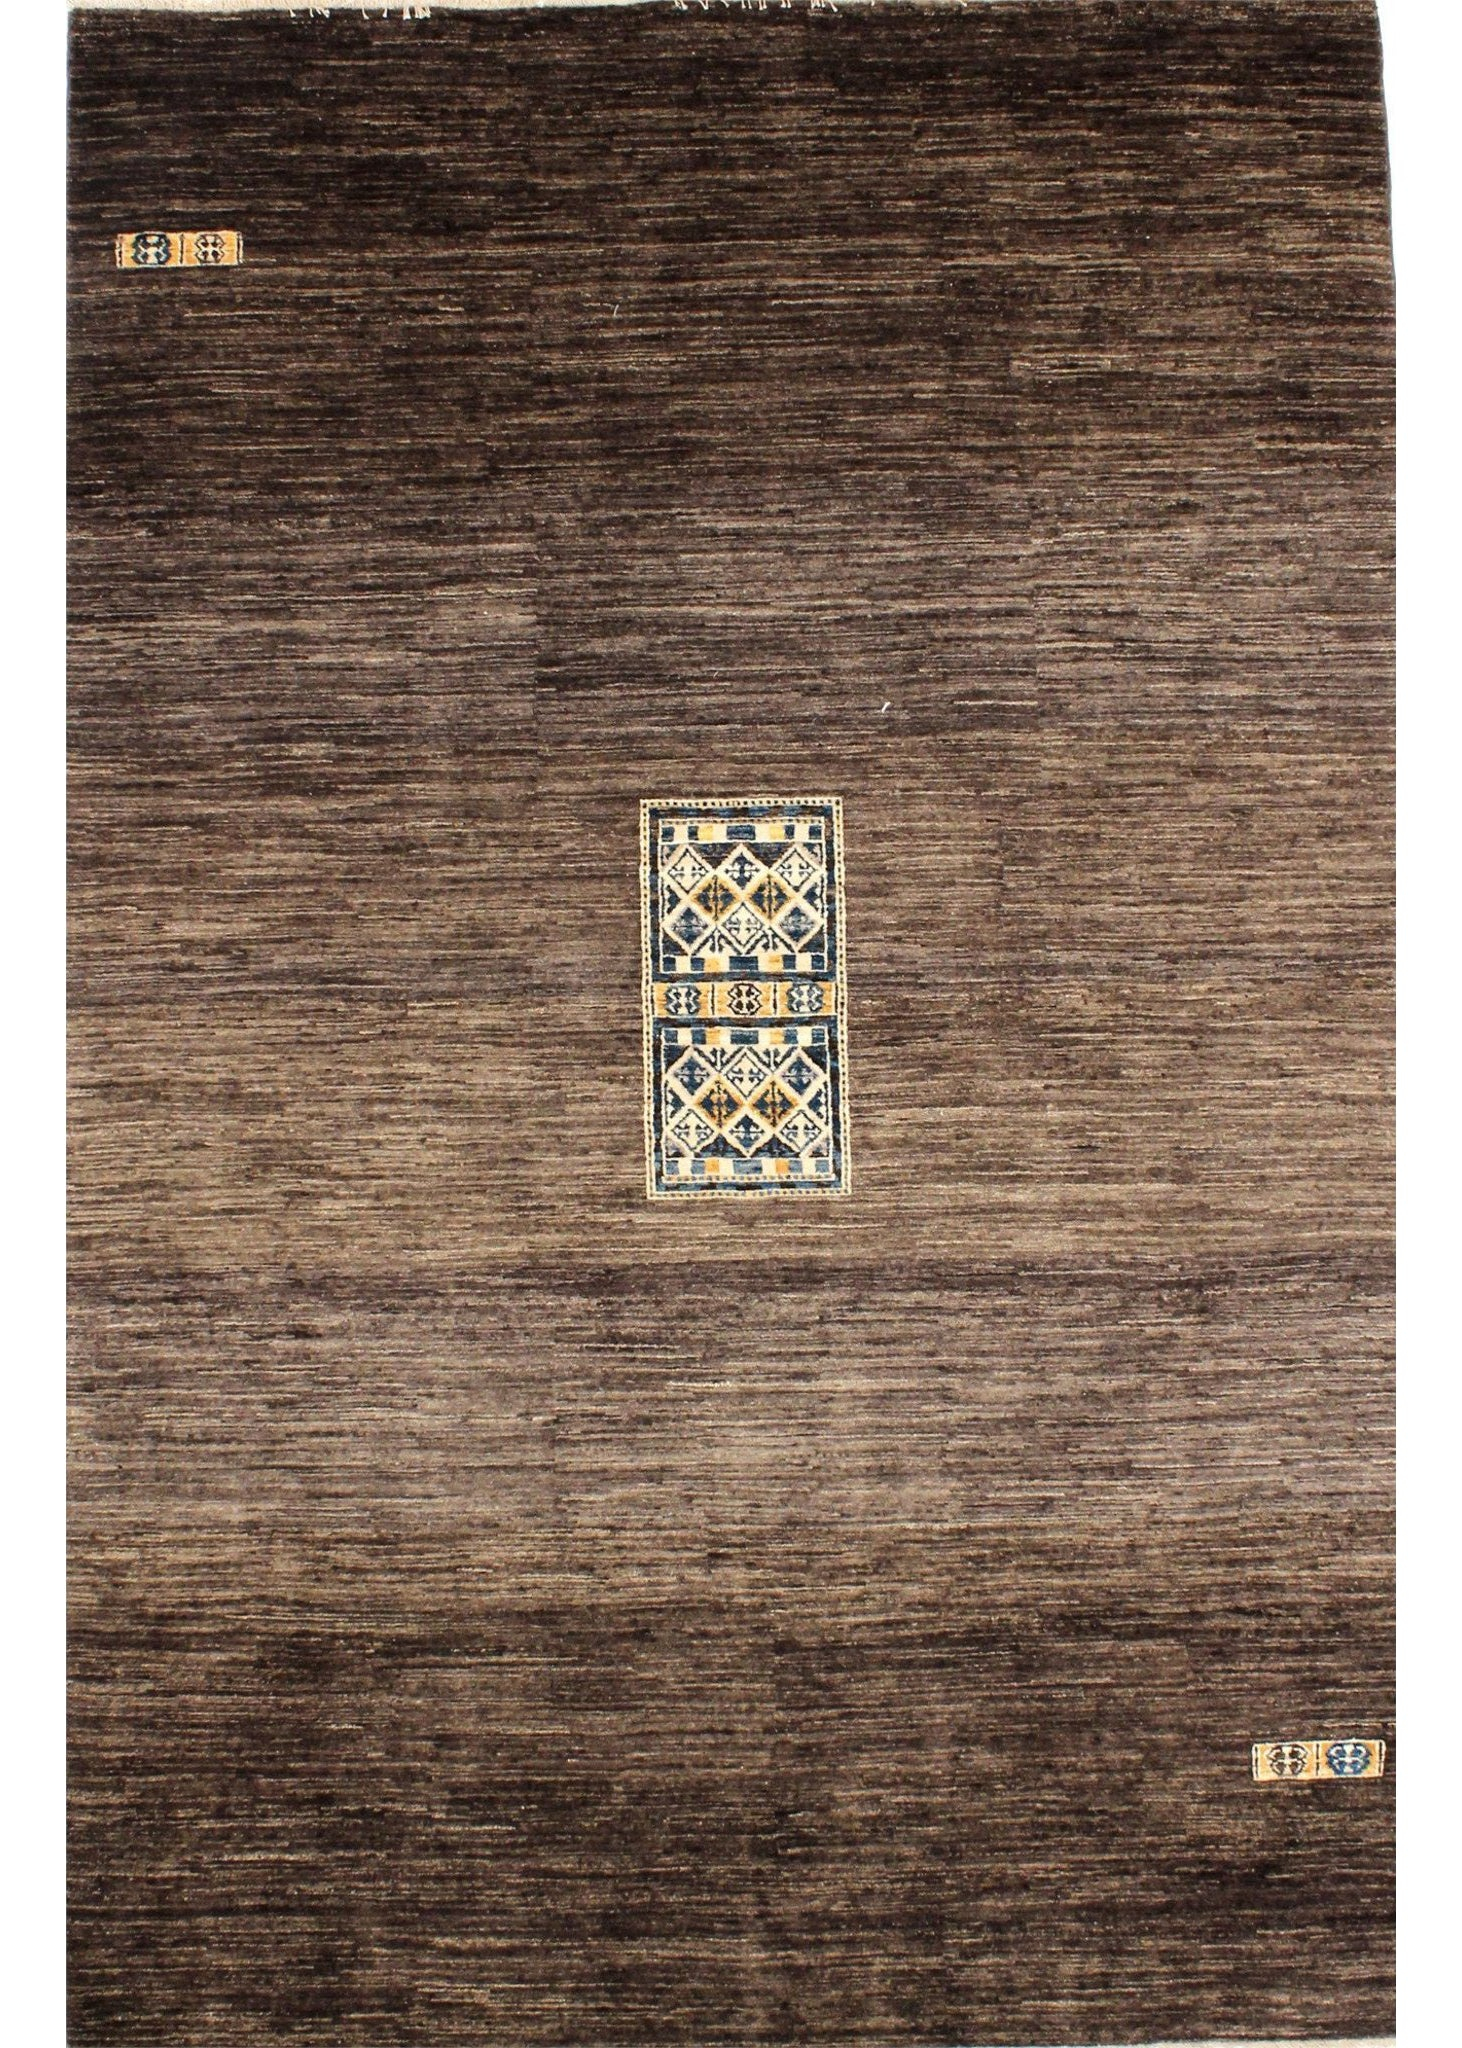 Area rug for living space and any room. Floor decor, rugs and carpets from Tabrizi Rugs. Chobi - 5'6